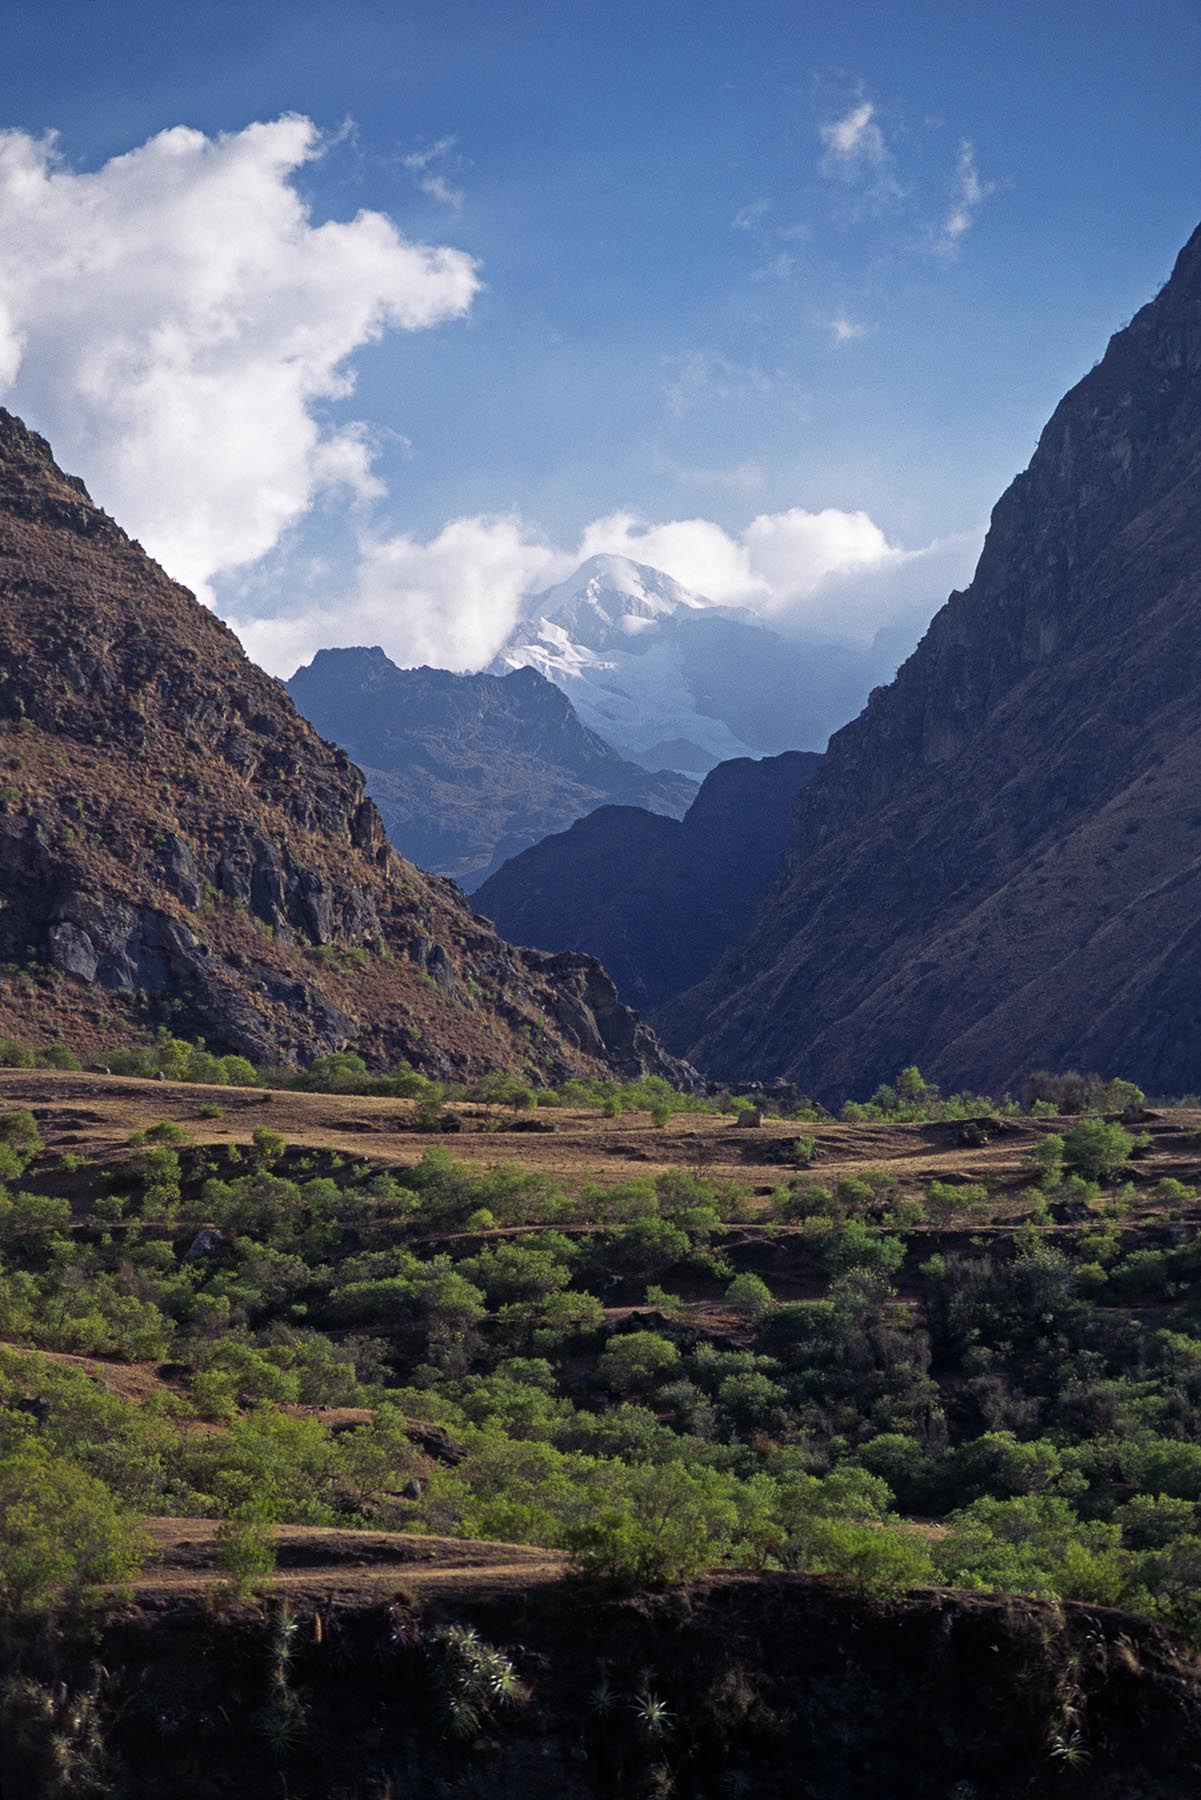 View up the CUSICHACA River Valley from Kilometer 88 on the INCA TRAIL TO MACHU PICCHU - PERUVIAN ANDES